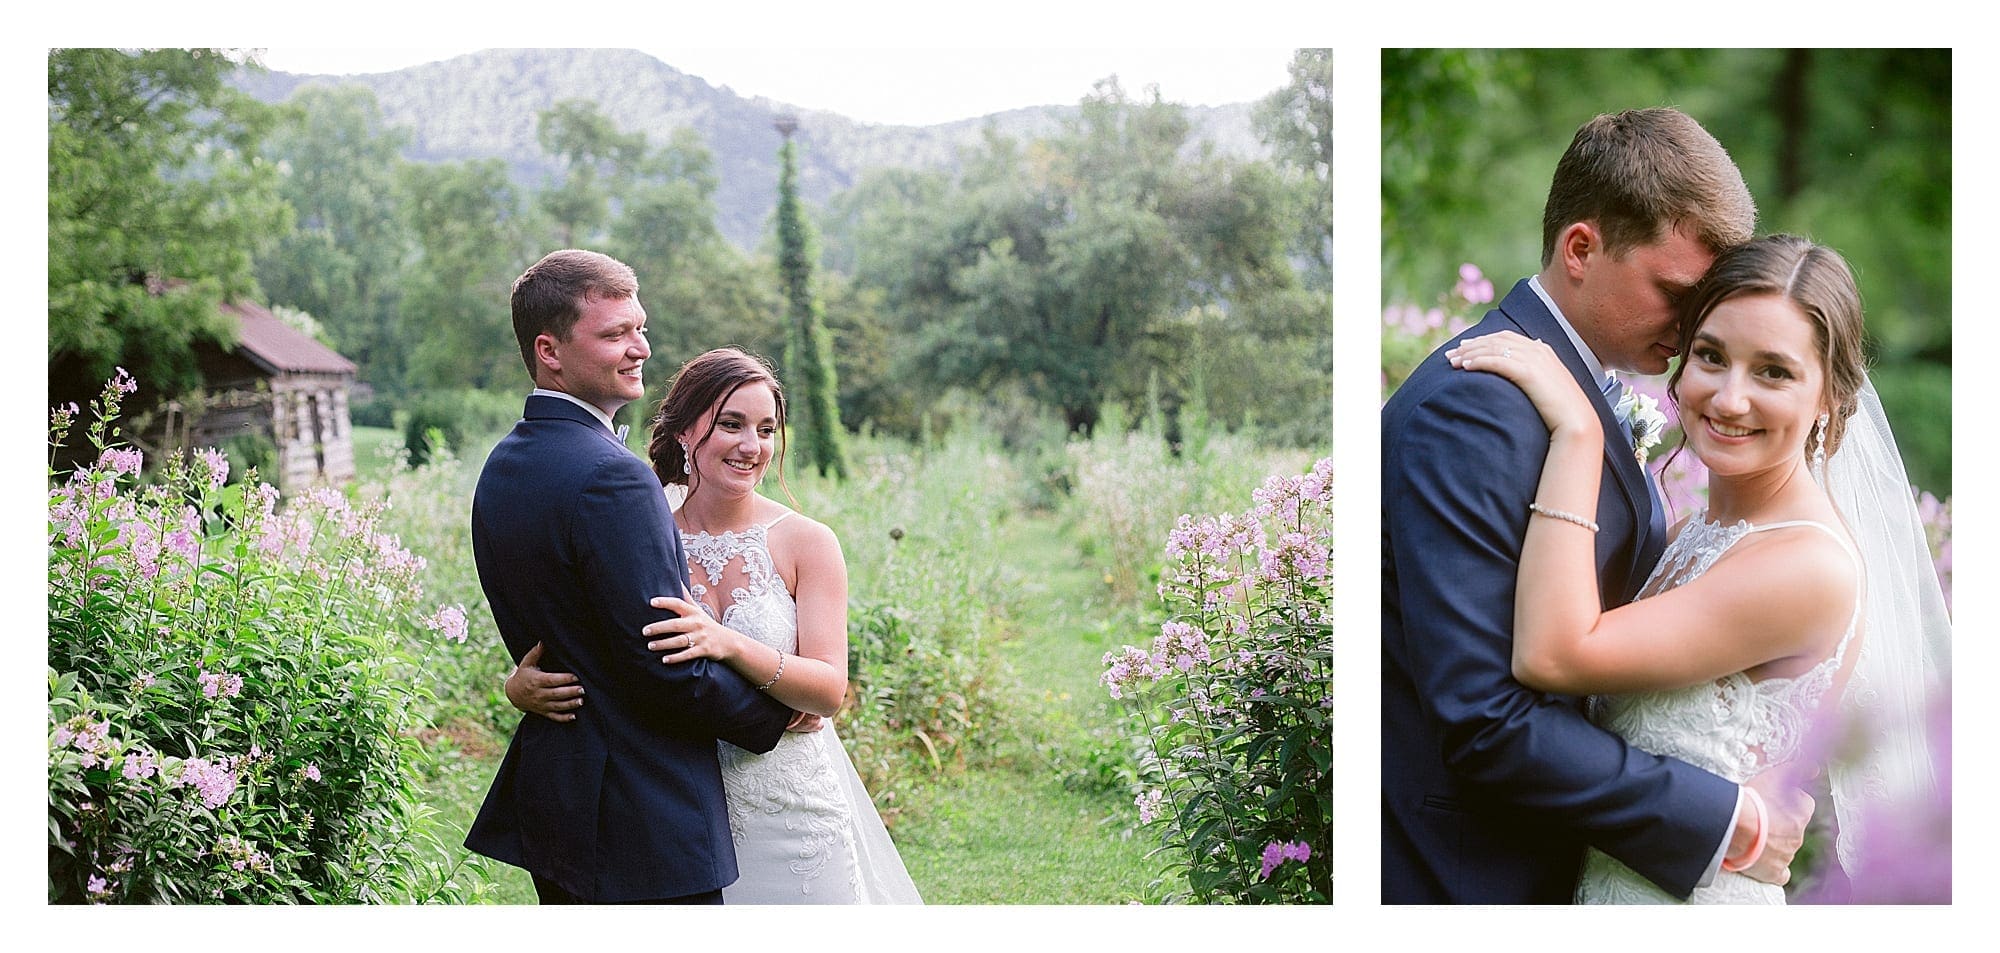 Groom hugging bride outside in wildflower field while she smiles at camera